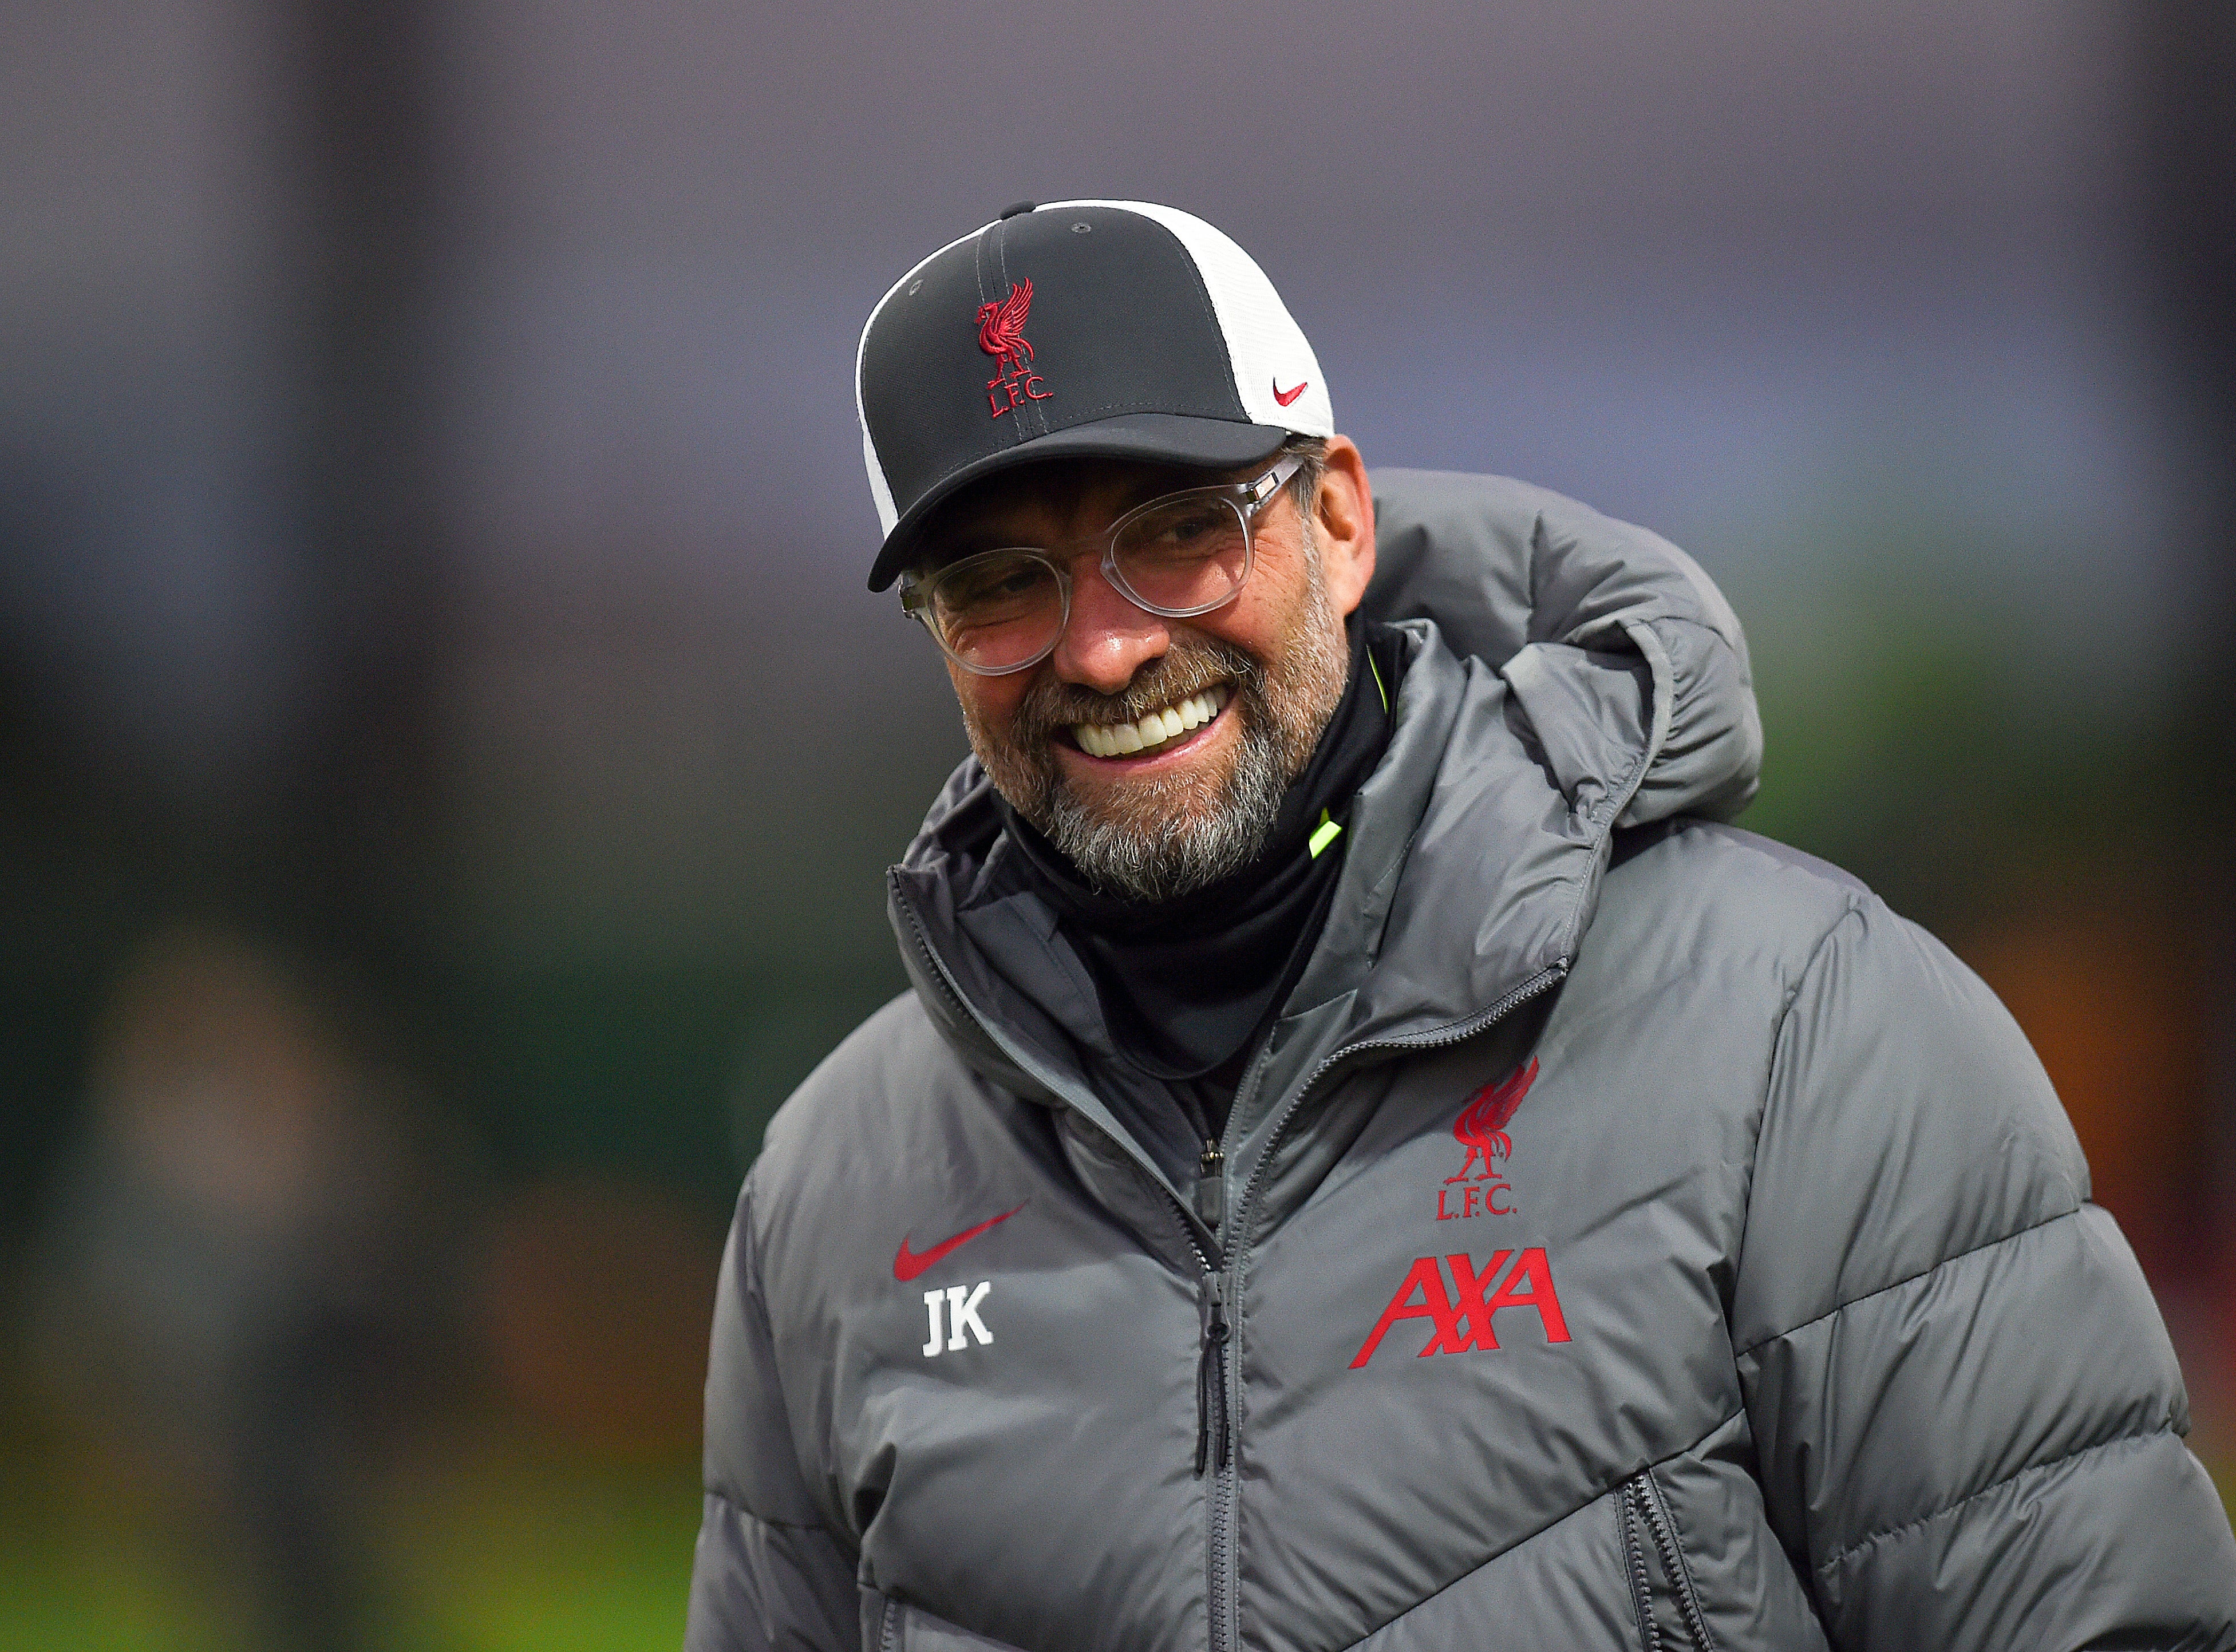 Jurgen Klopp is not concerned by the January transfer window despite Liverpool’s defensive crisis